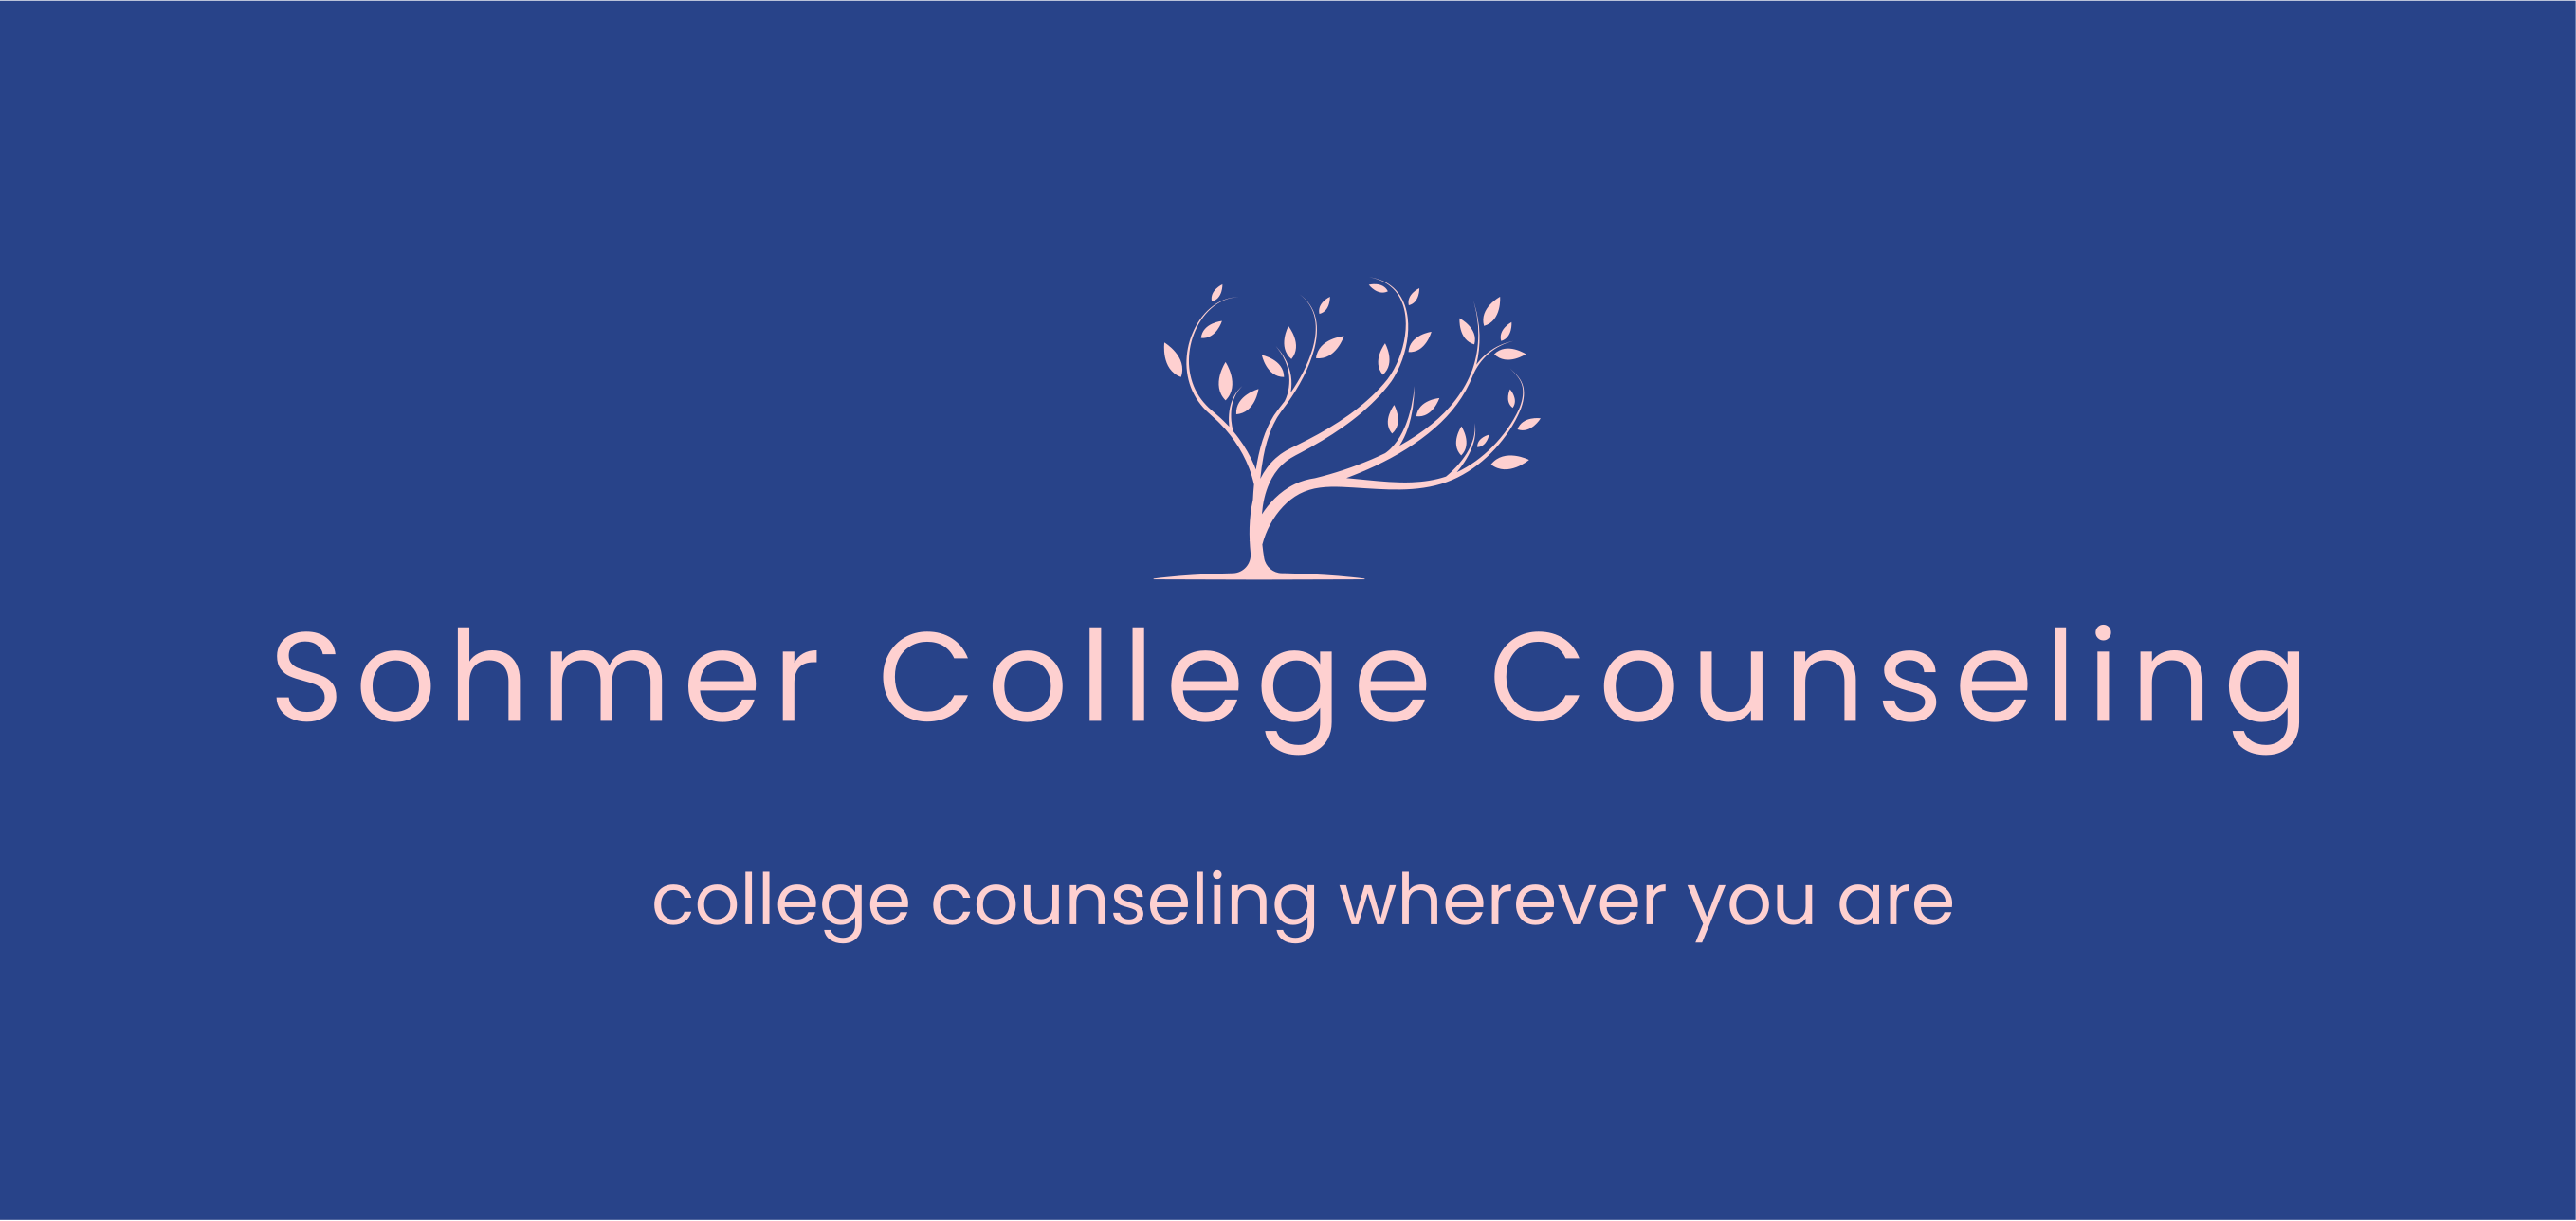 Sohmer College Counseling